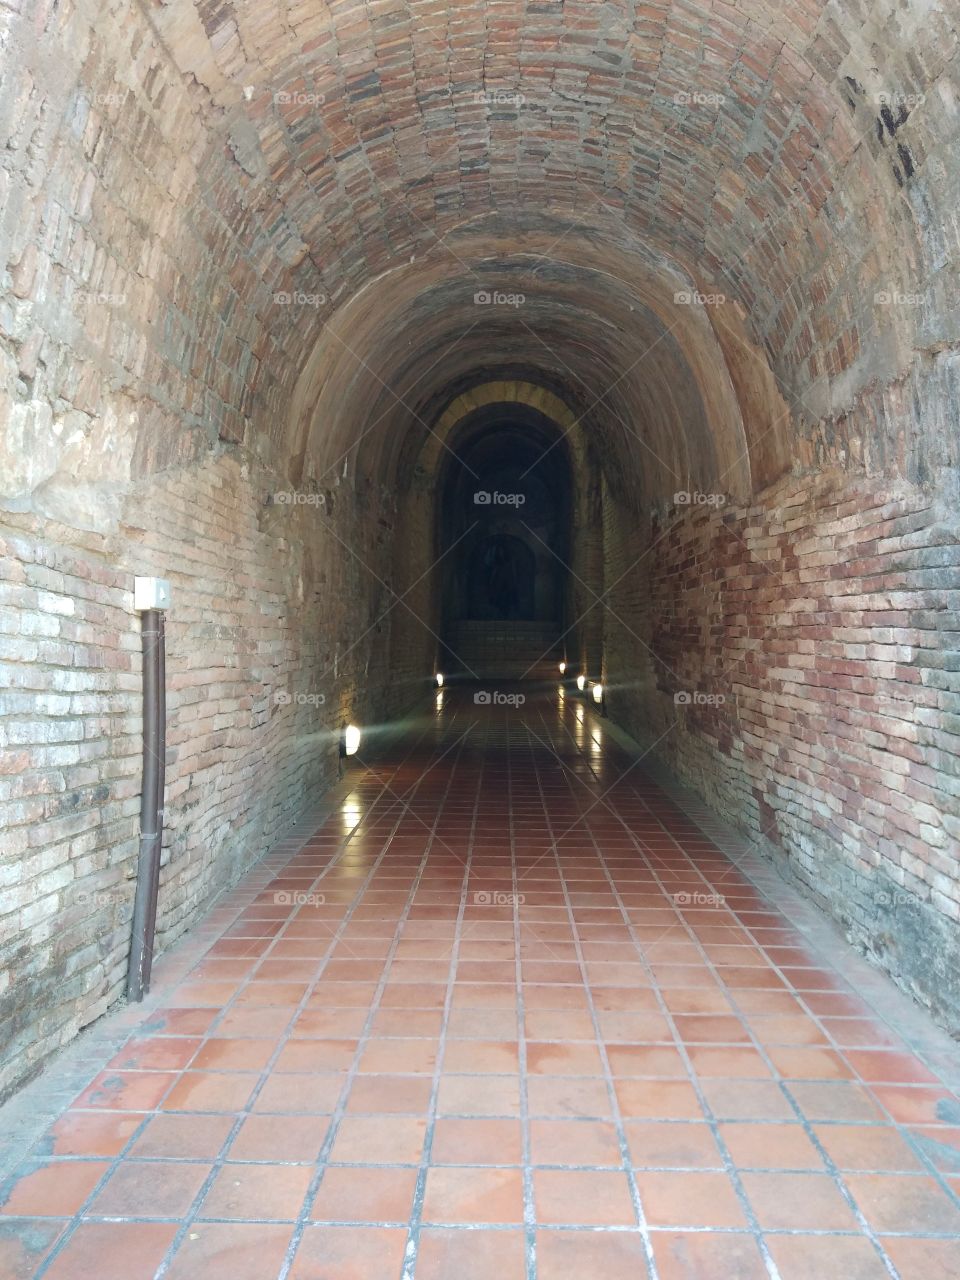 An ancient brick tunnel that was developed as a tourist attraction.